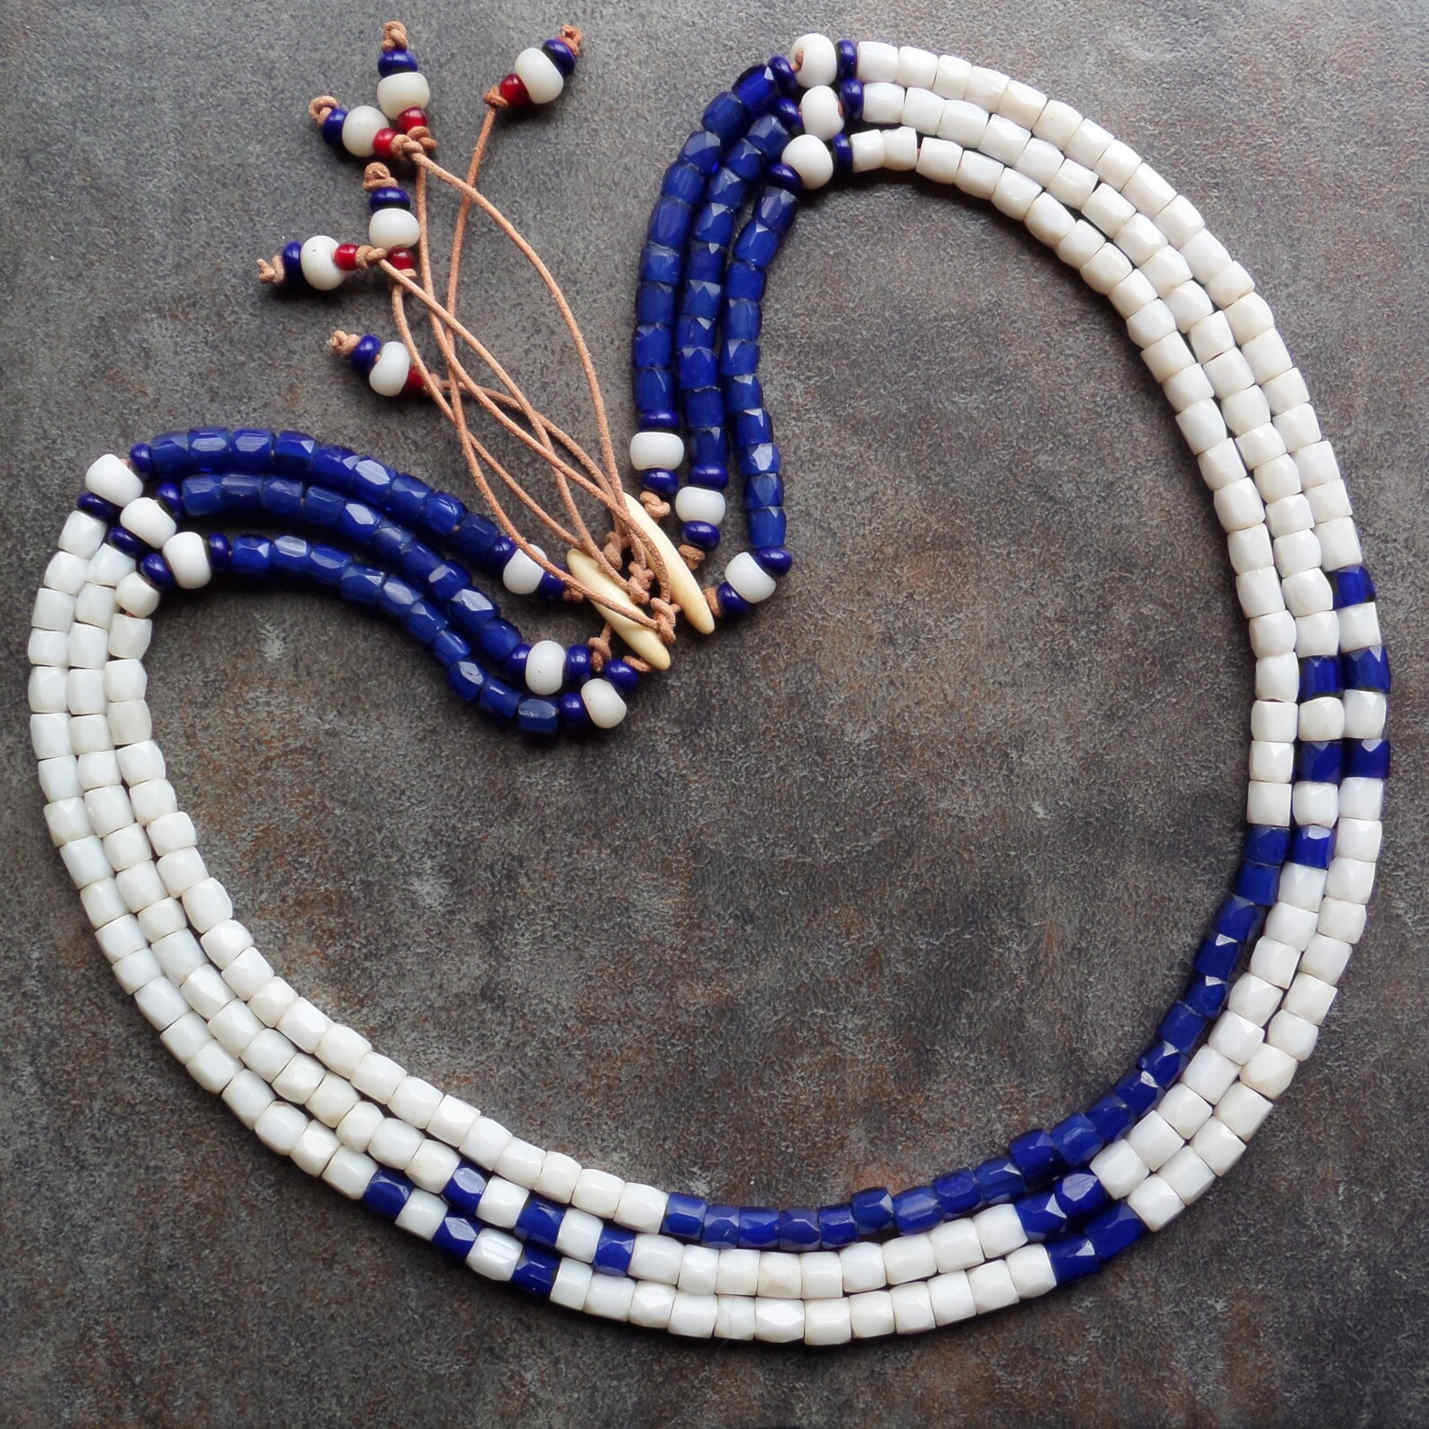 White_Milk_Glass_Russian_Trade_Bead_Necklaces_small_file_1.jpg (230.6 KB)